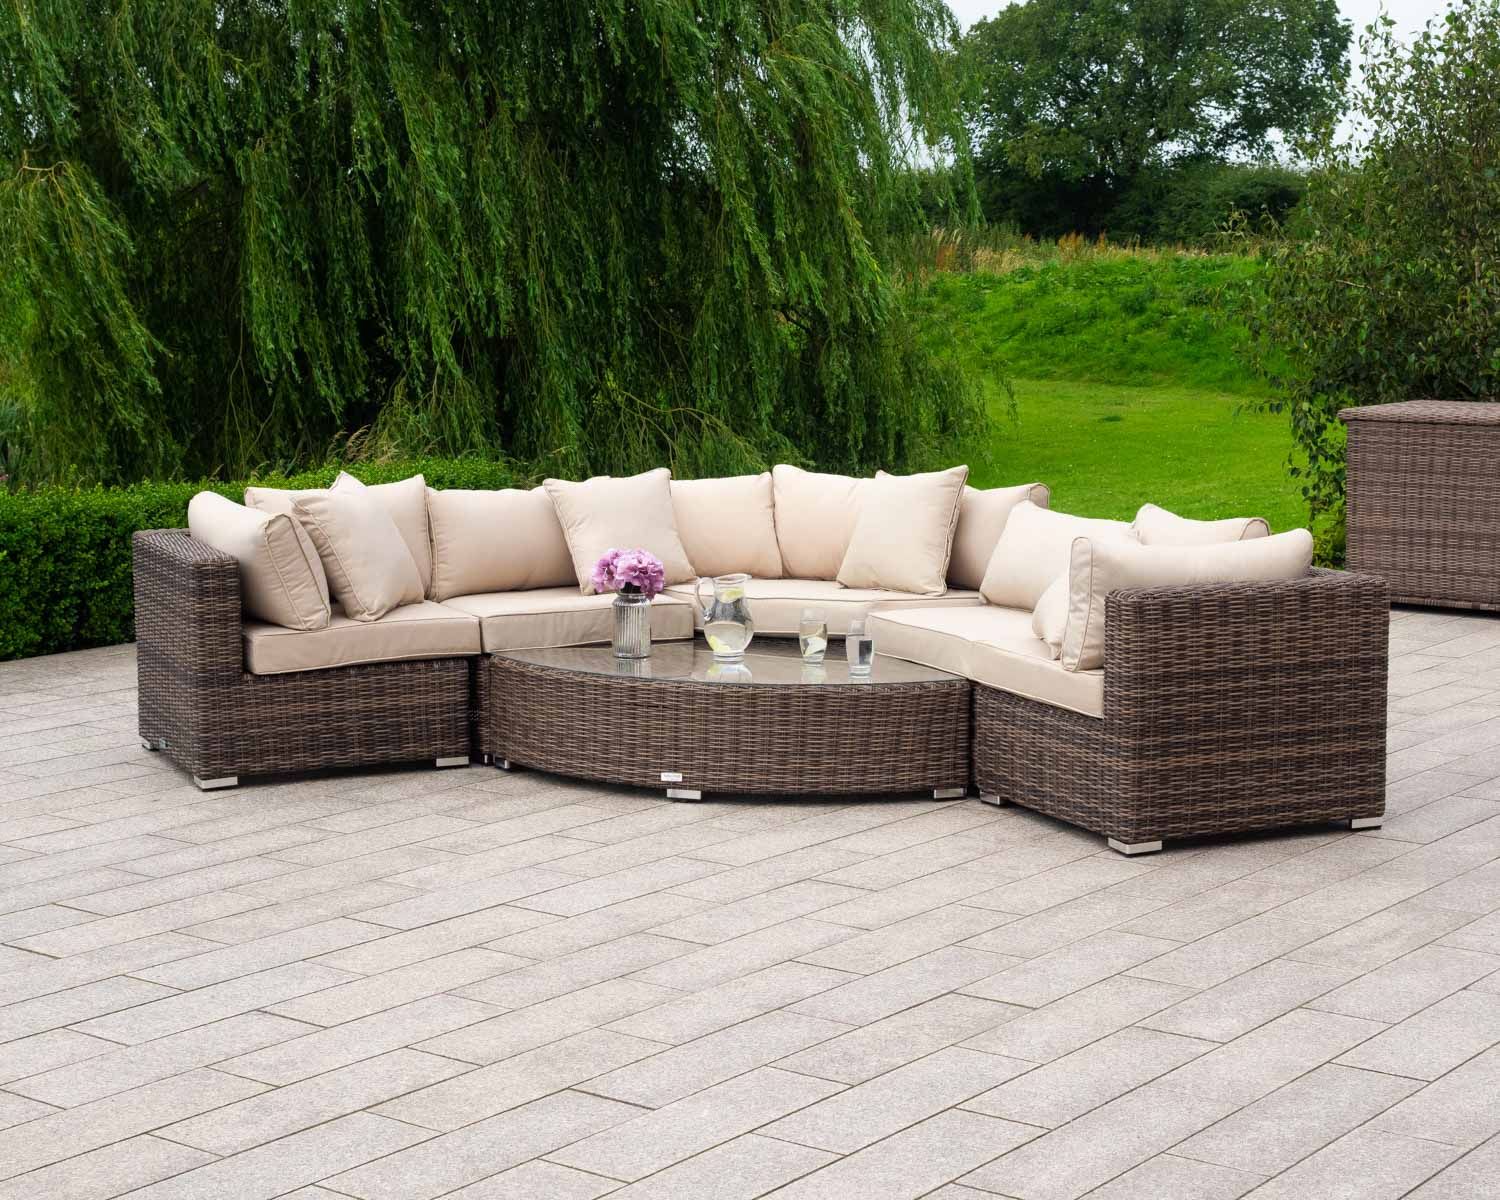 Rattan Garden Corner Sofa Set In Truffle Brown & Champagne – 6 Piece For Brown And Yellow Sectional Corner Desks (View 12 of 15)